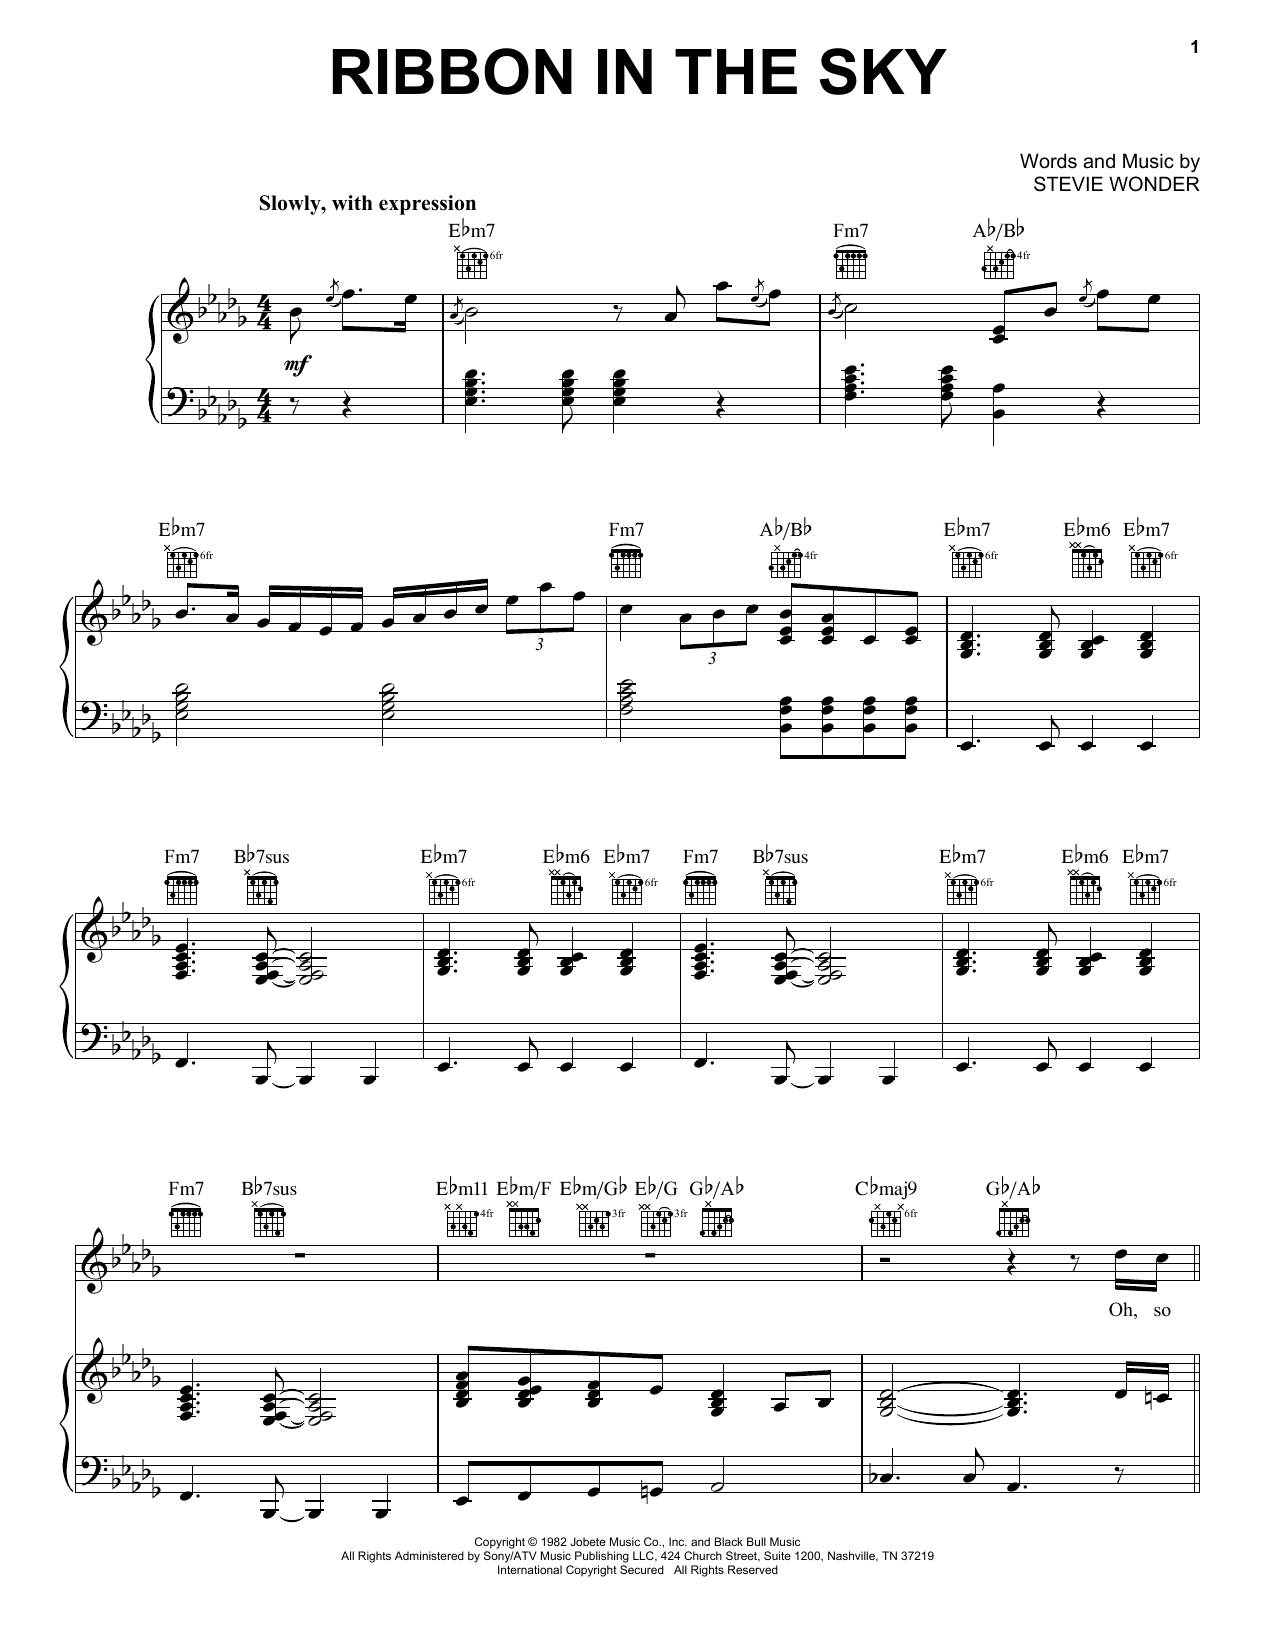 Stevie Wonder Ribbon In The Sky sheet music preview music notes and score for Piano including 5 page(s)